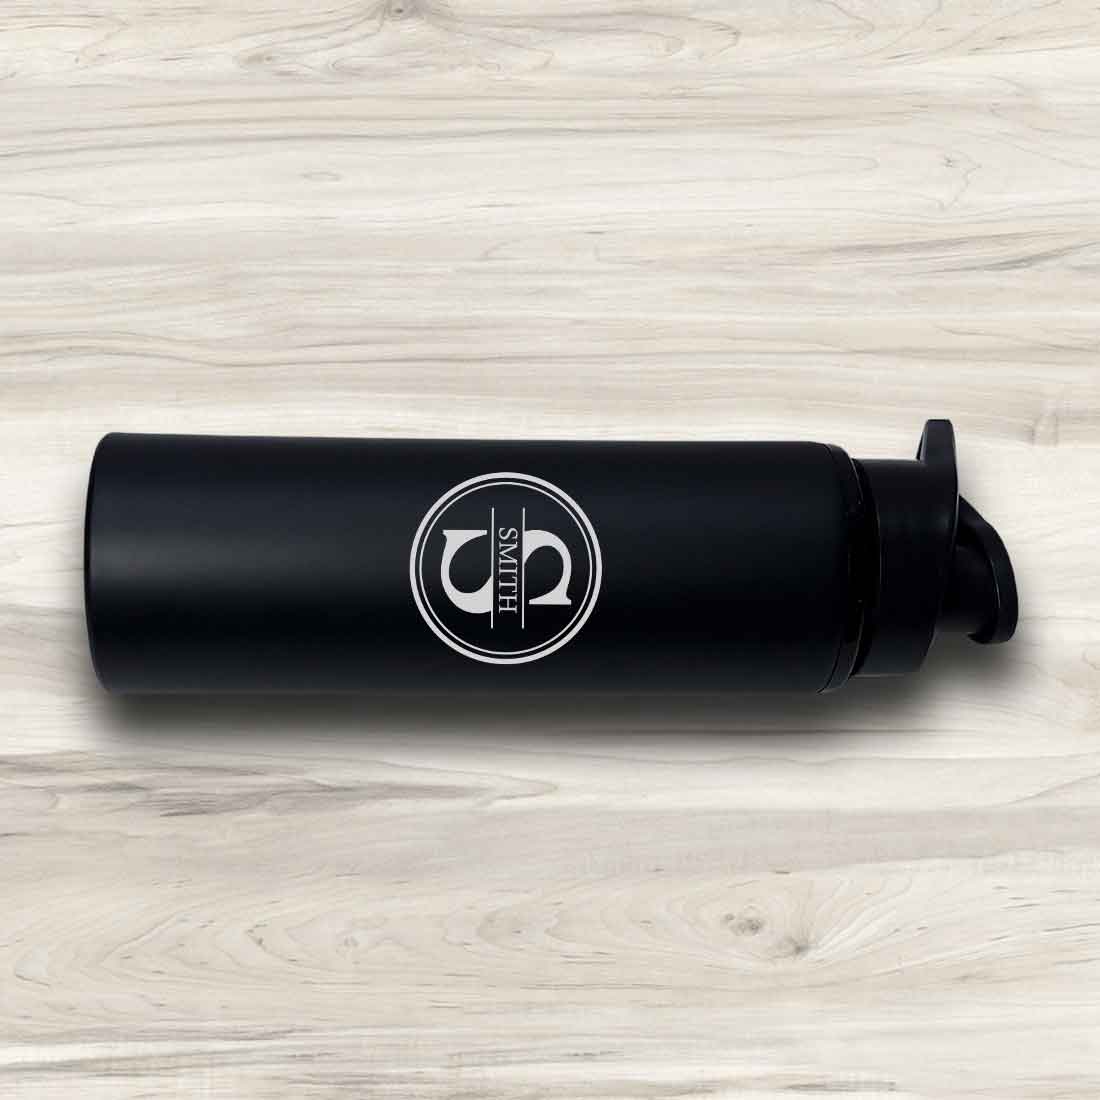 Personalized Sipper Bottle for Office Use Stainless Steel - Initials Name